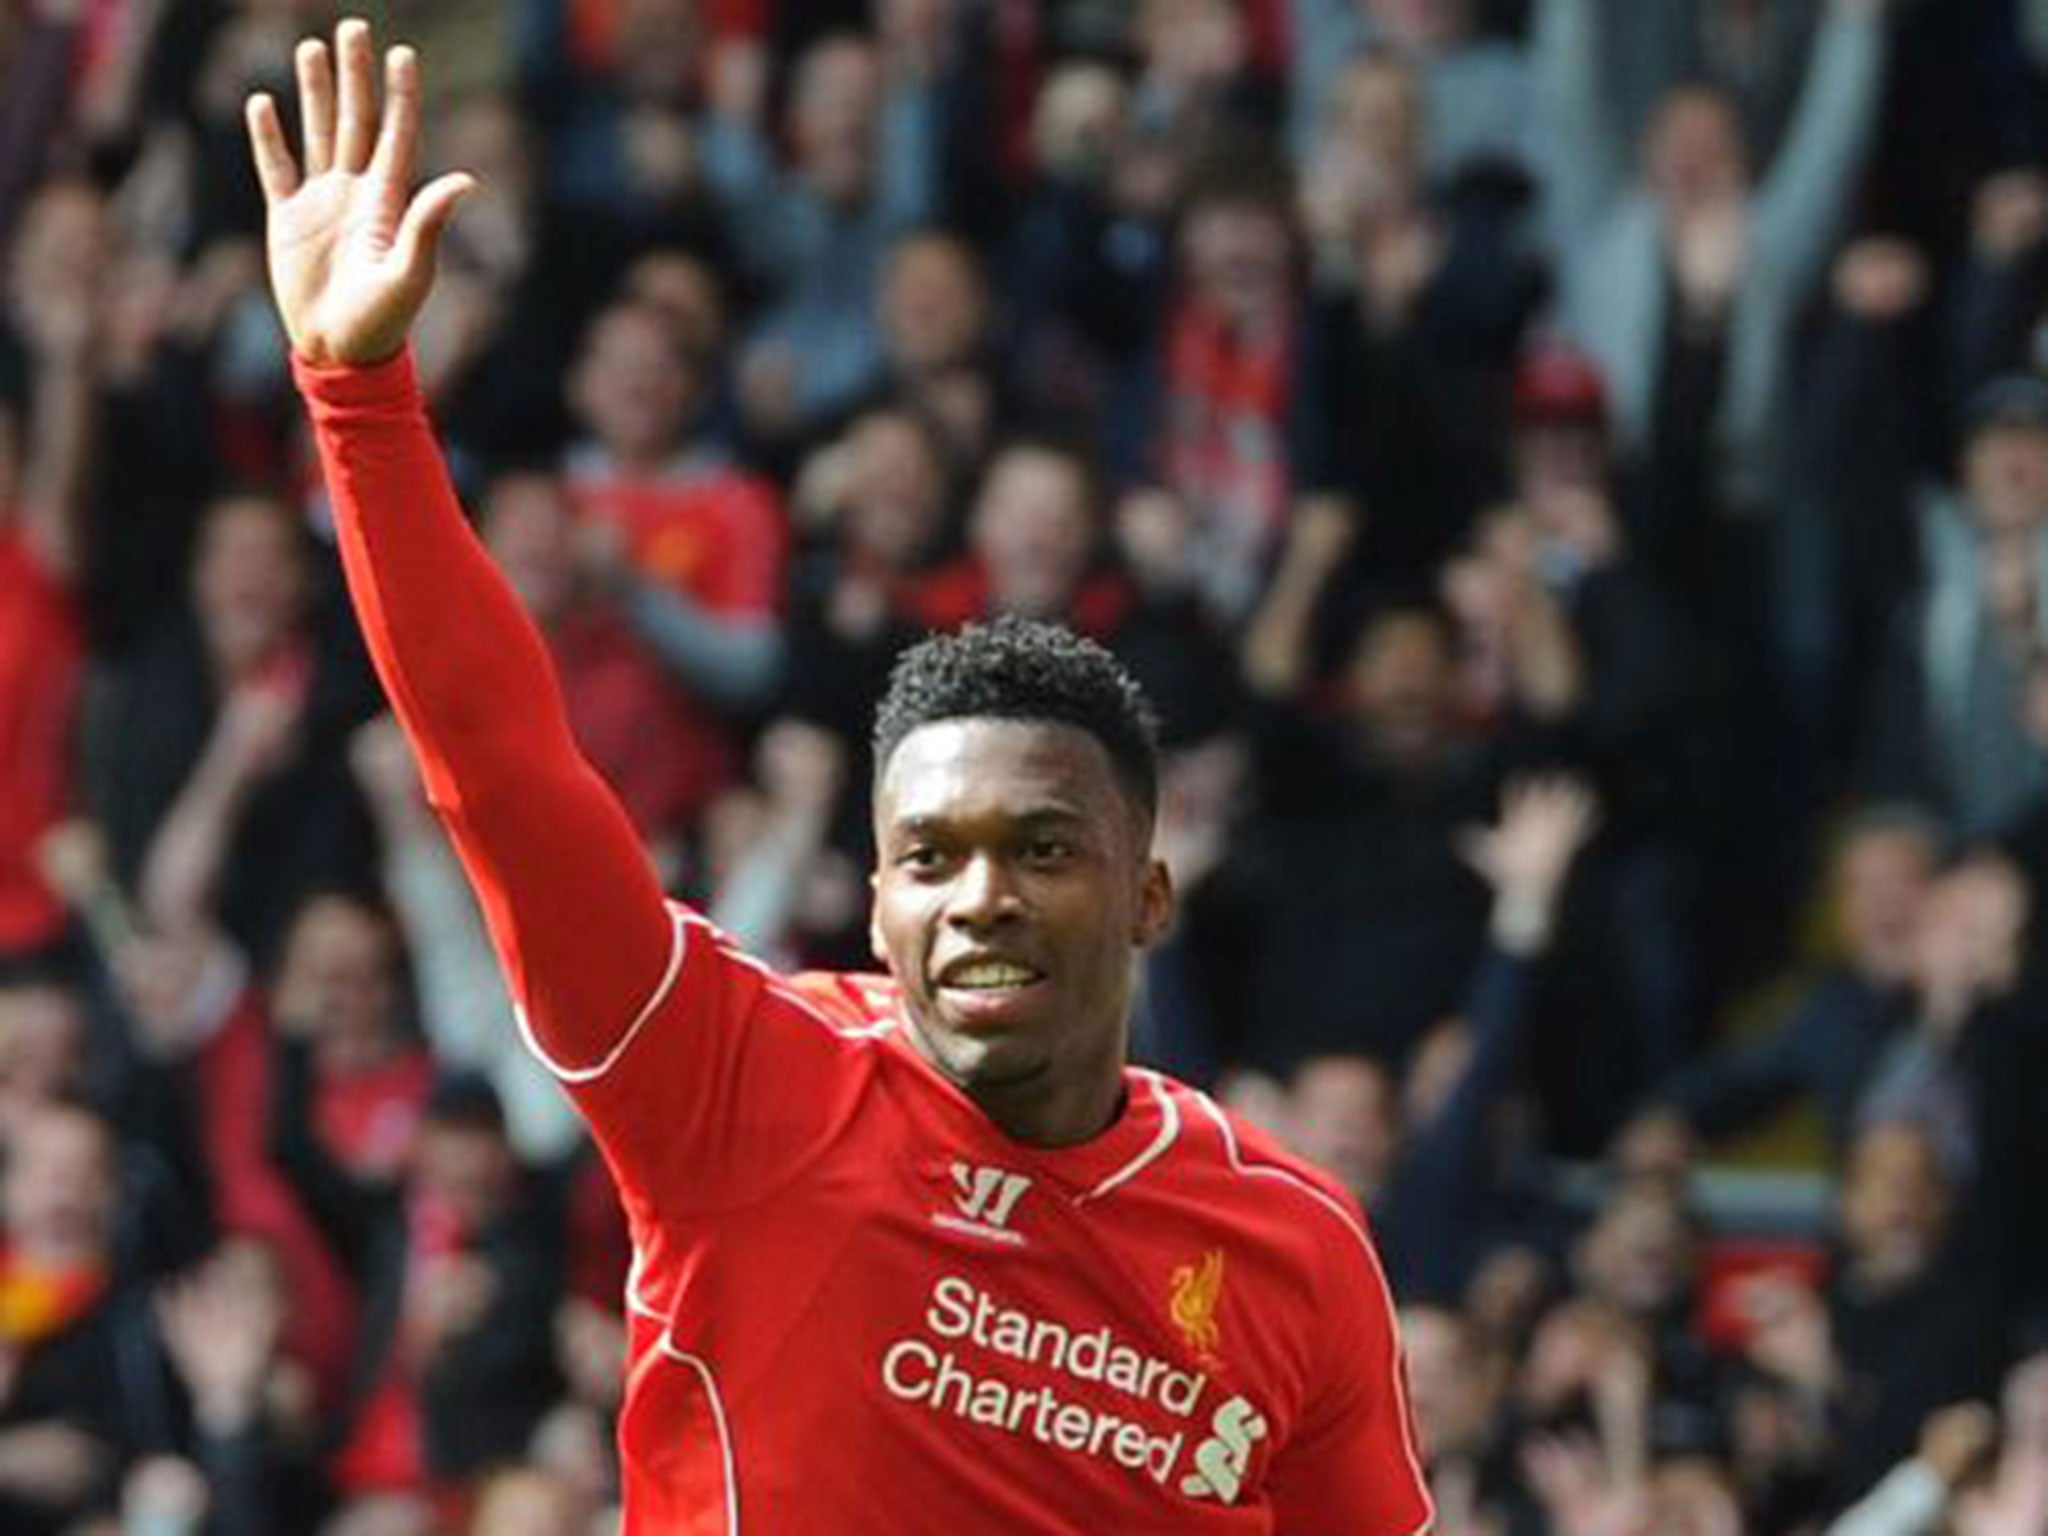 Daniel Sturridge is considered among the best strikers in the Premier League - but that wasn't always the case